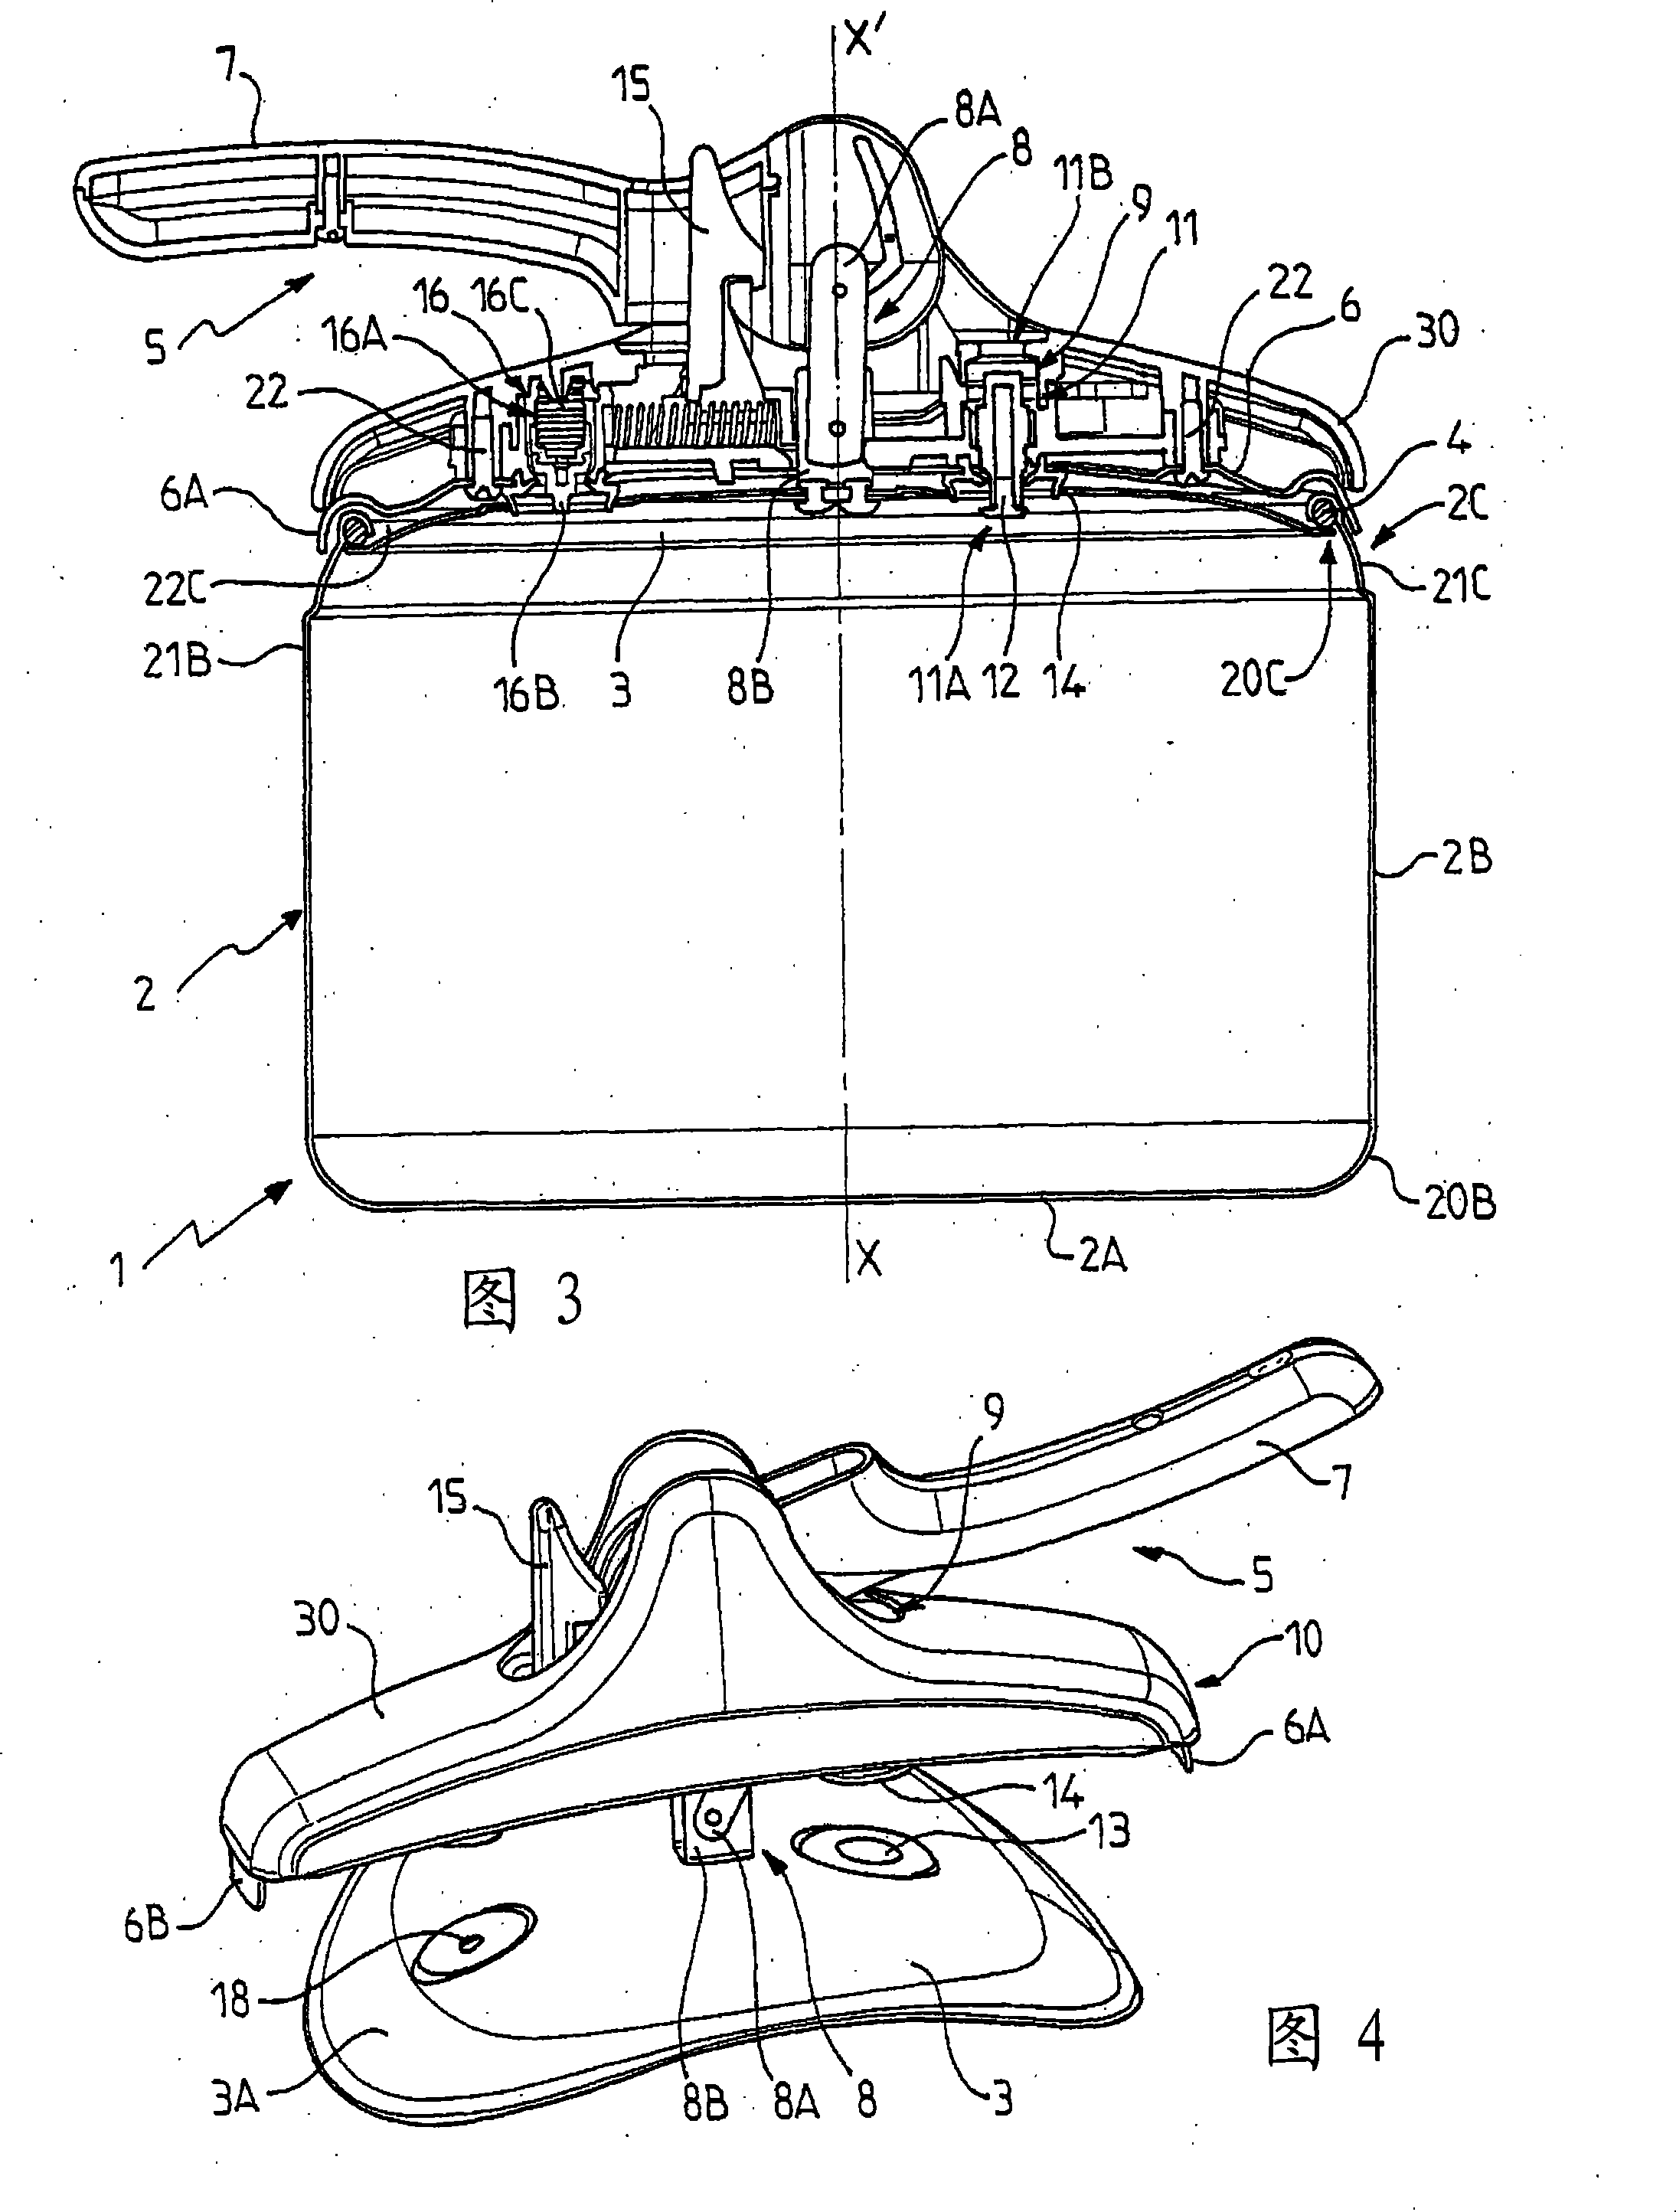 Pressure-cooking device with improved construction and corresponding manufacturing method